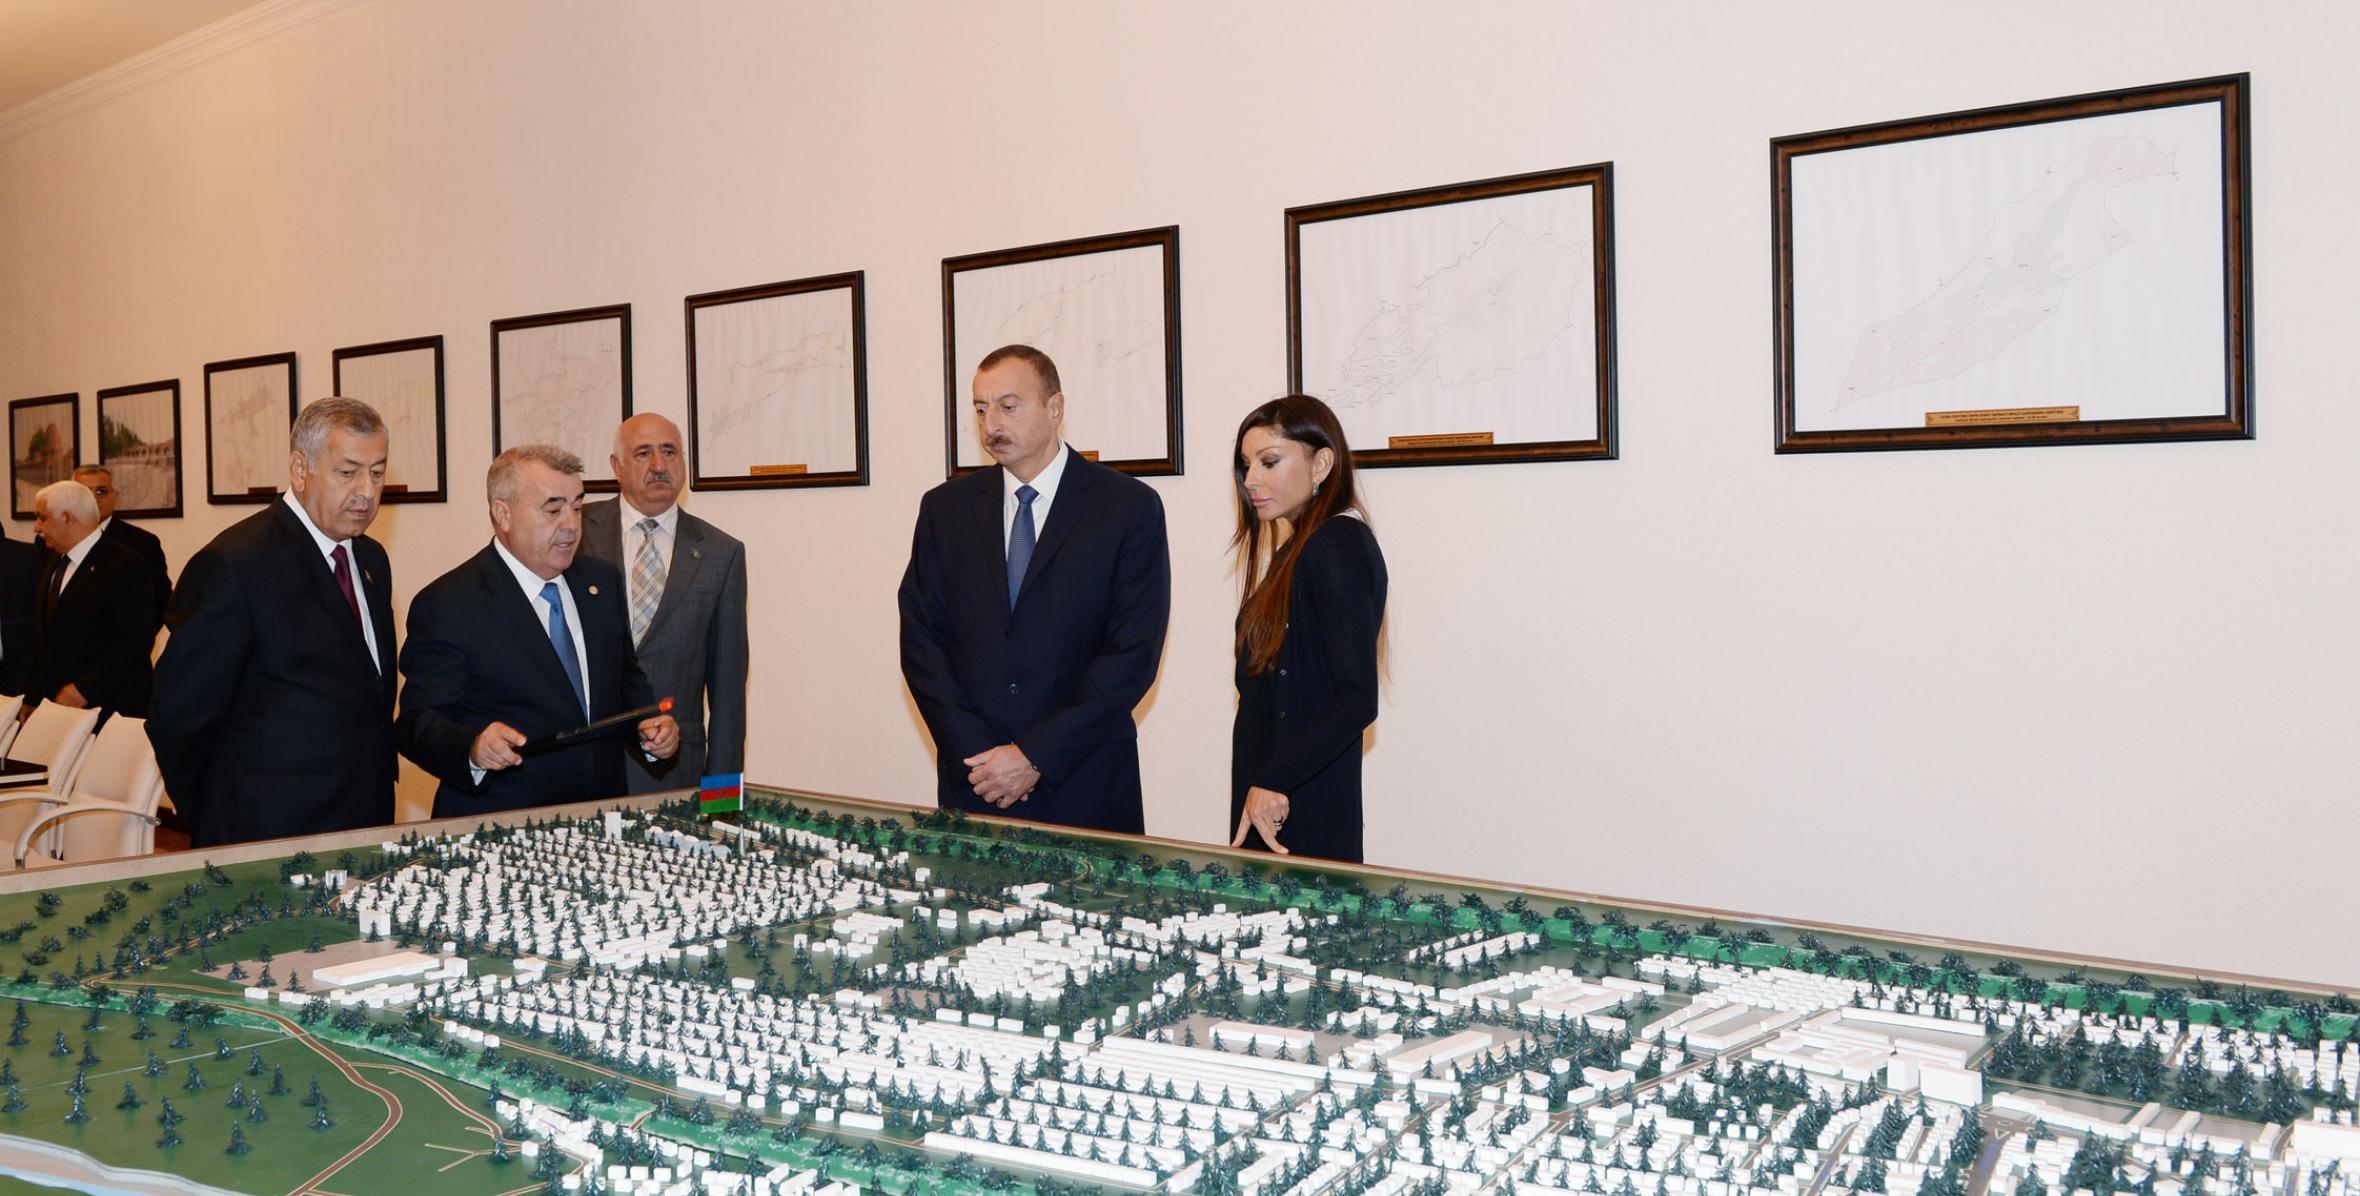 Ilham Aliyev attended the opening of a new office building of the Guba District Executive Authority